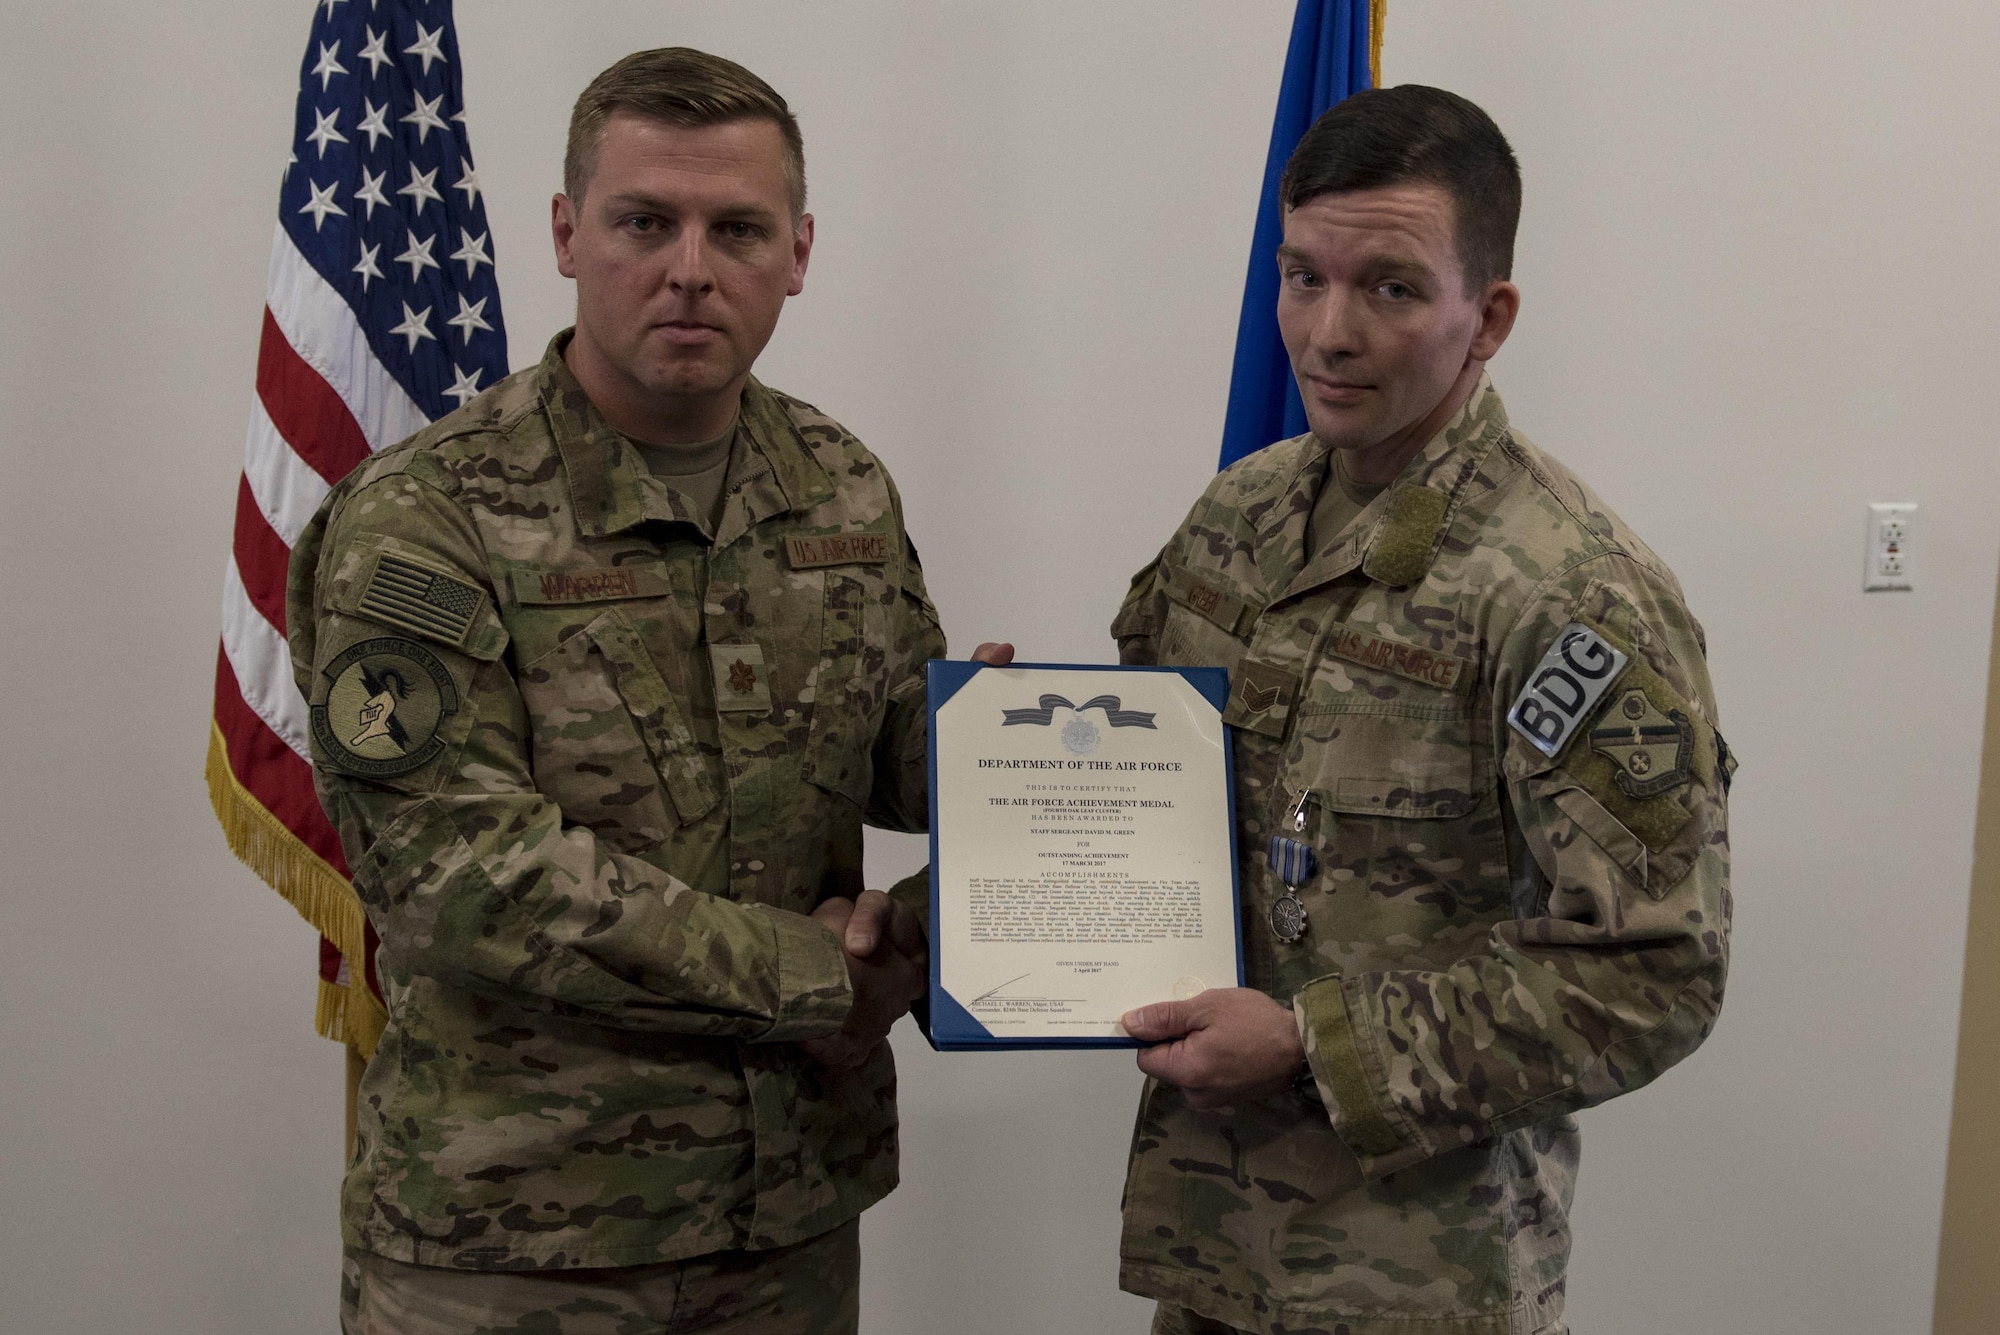 Maj. Michael Warren, 824th Base Defense Squadron commander, awards Staff Sgt. David Green, 824th BDS fireteam leader, with an achievement medal, April 10, 2017, at Moody Air Force Base, Ga. Green received the medal for his act of heroism when he helped a trapped victim during an off-base vehicle incident. (U.S. Air Force photo by Airman 1st Class Lauren M. Sprunk)